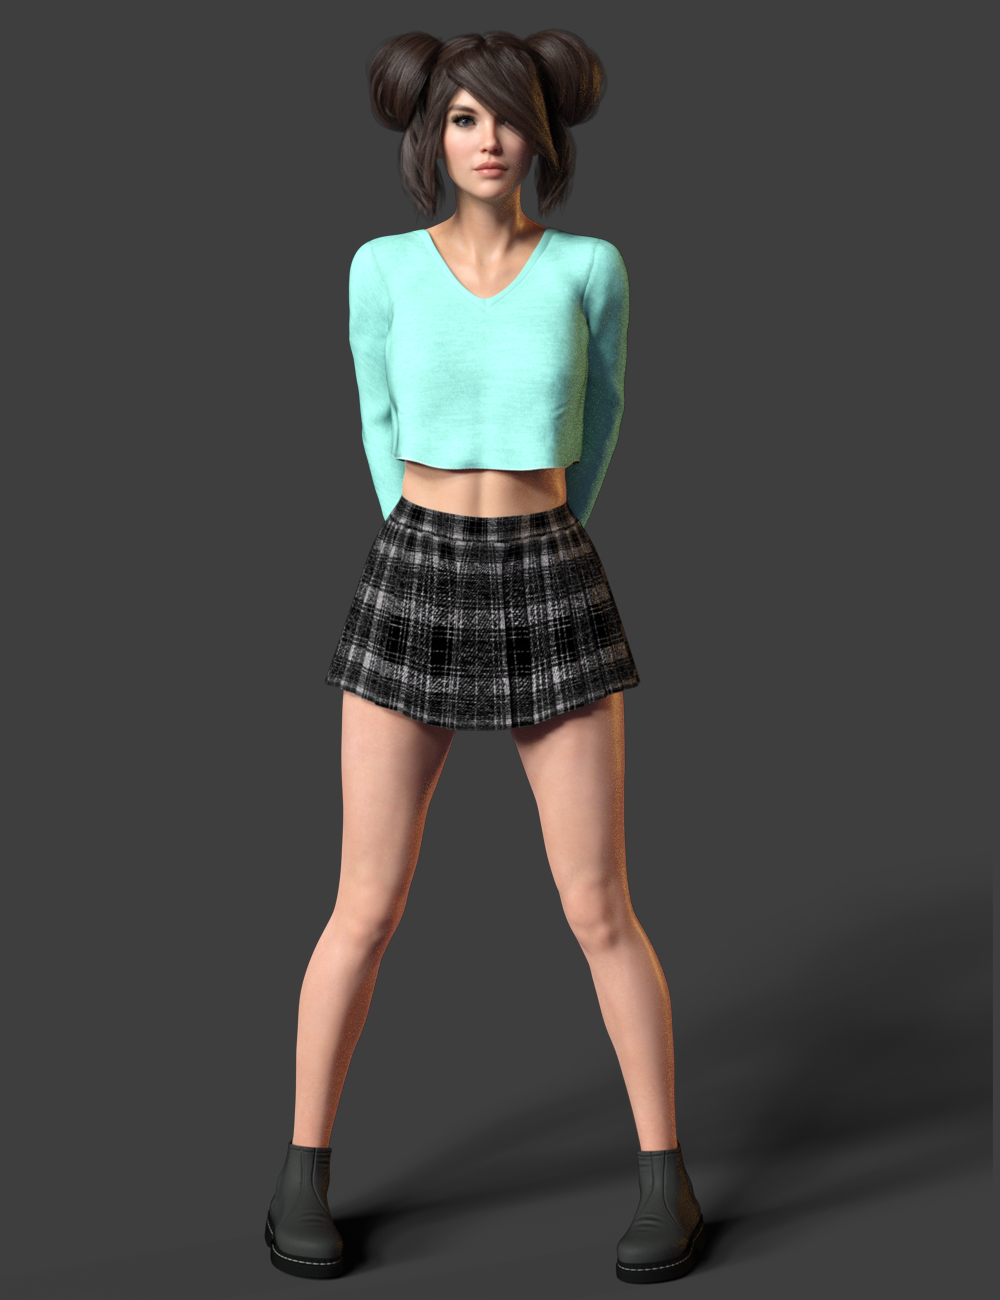 X Fashion Girl Collection For Genesis 8 Females Daz 3d 1940